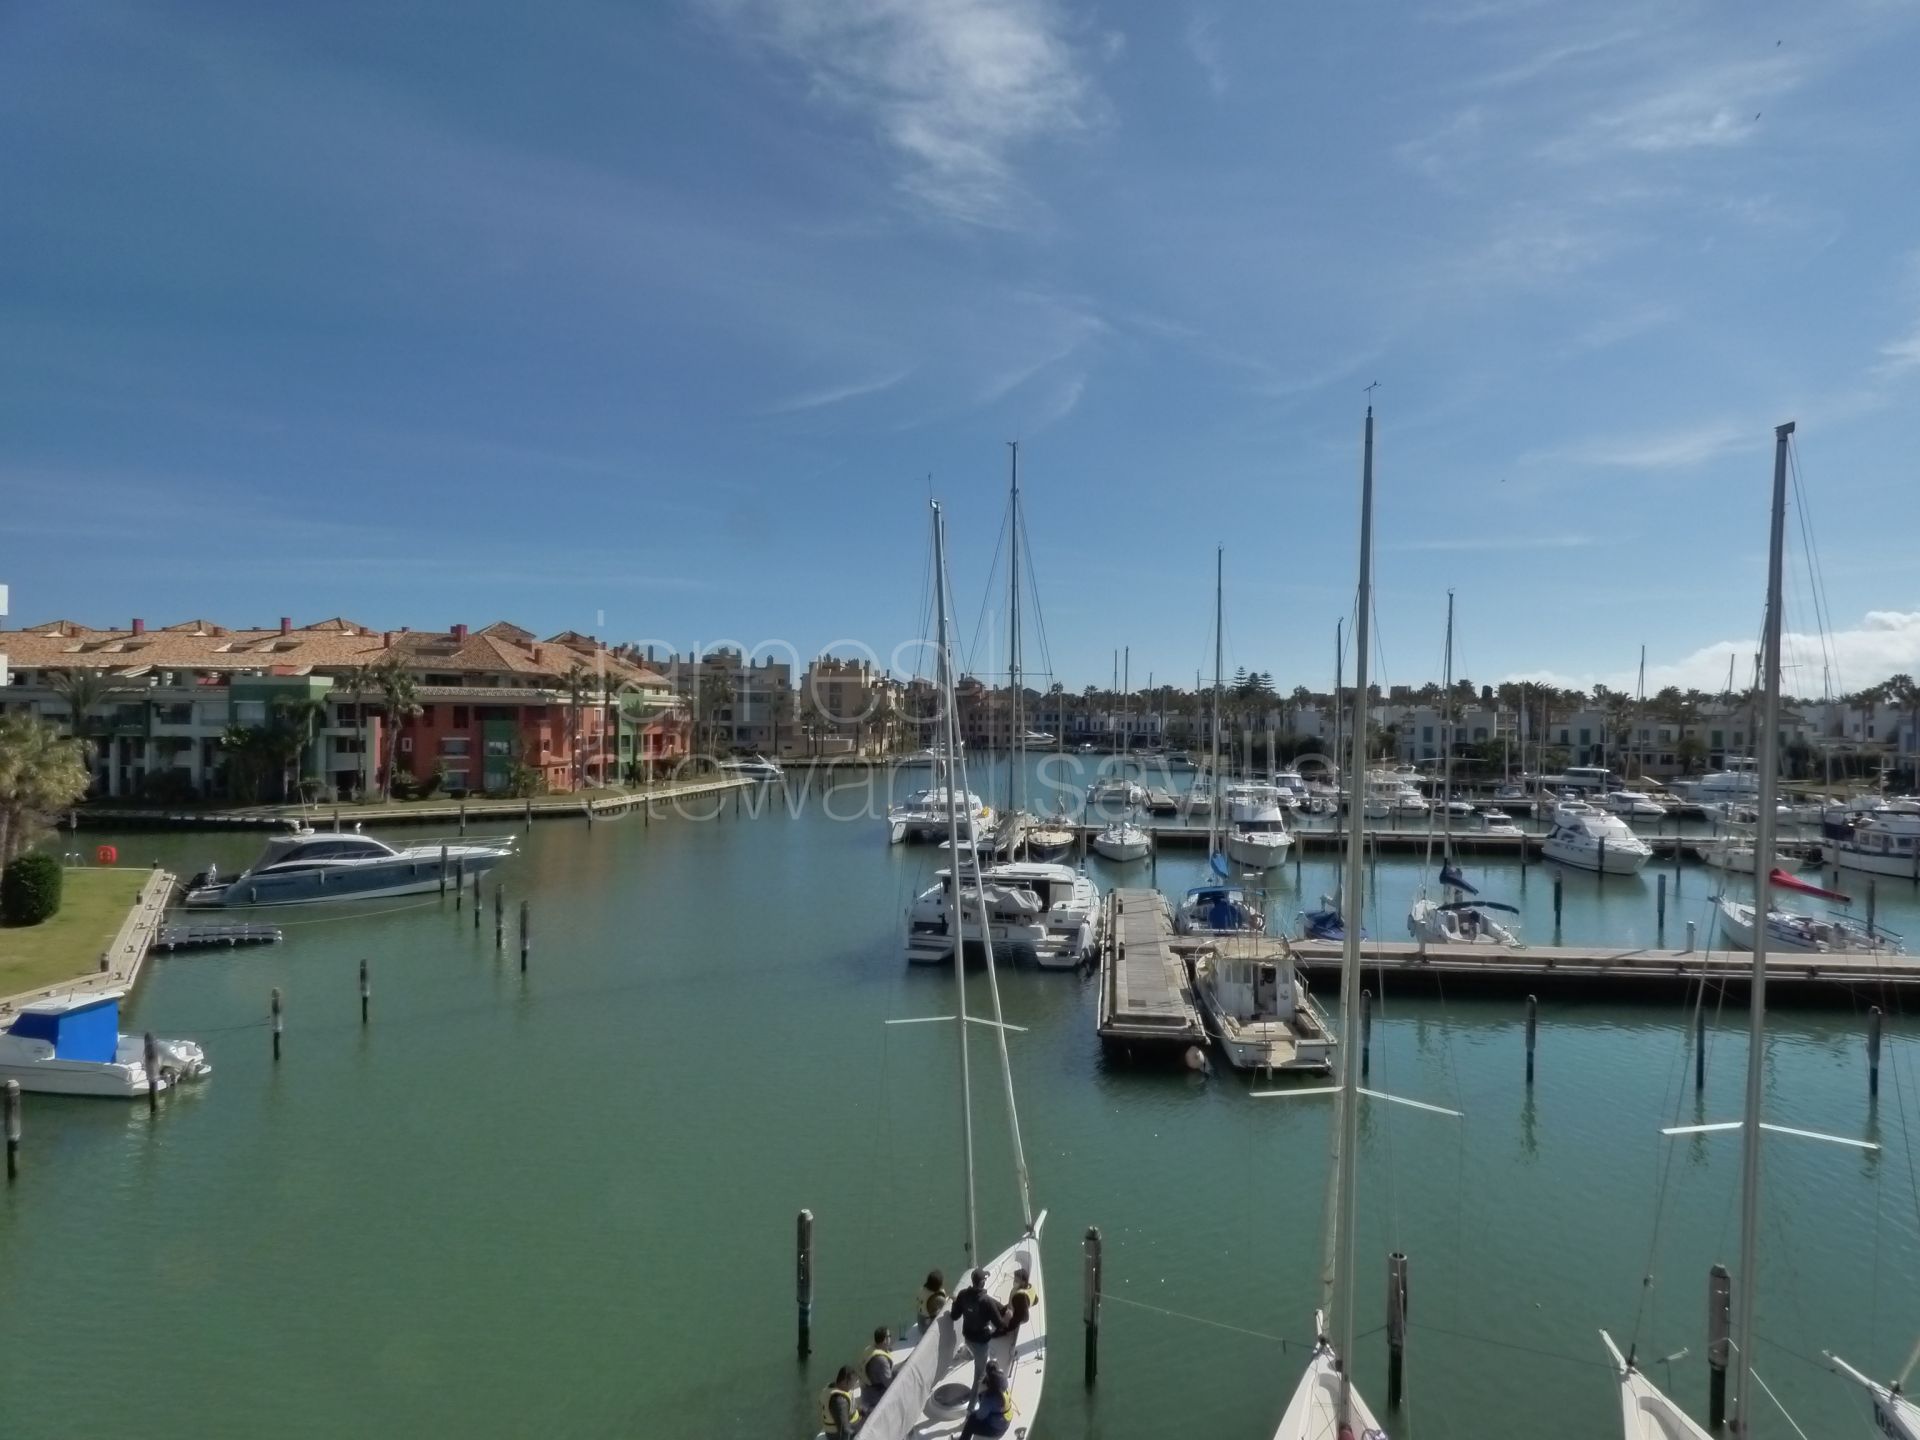 Bright and spacious 3-bedroom apartment with views of the Sotogrande Marina.